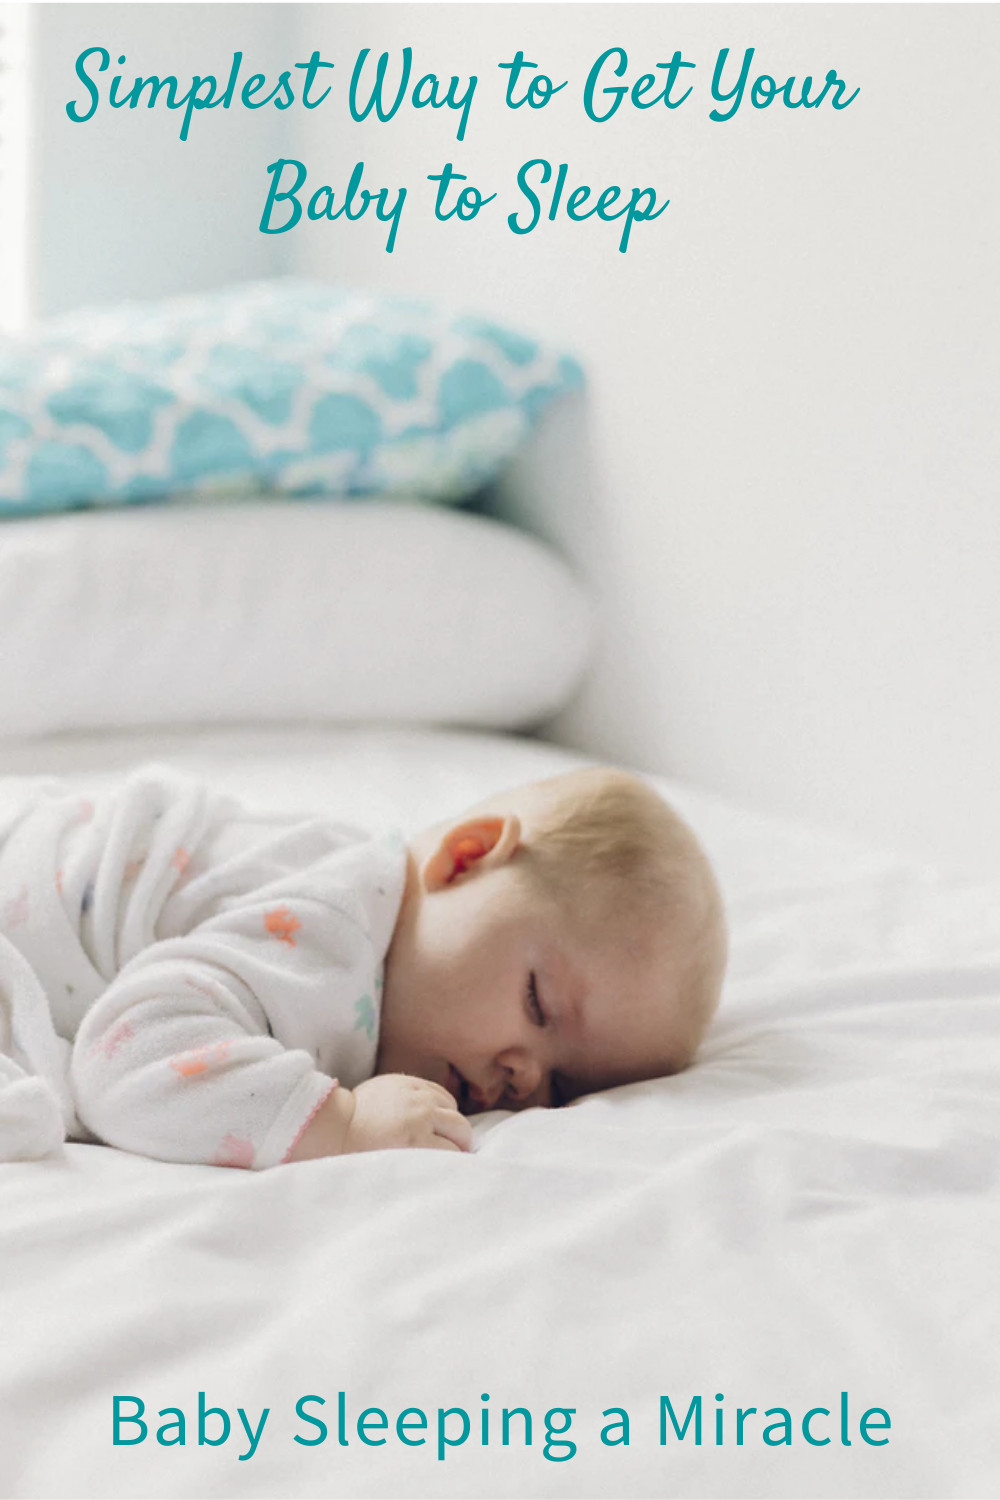 Getting your baby to sleep its giving you a hard time? Learn how to put ...